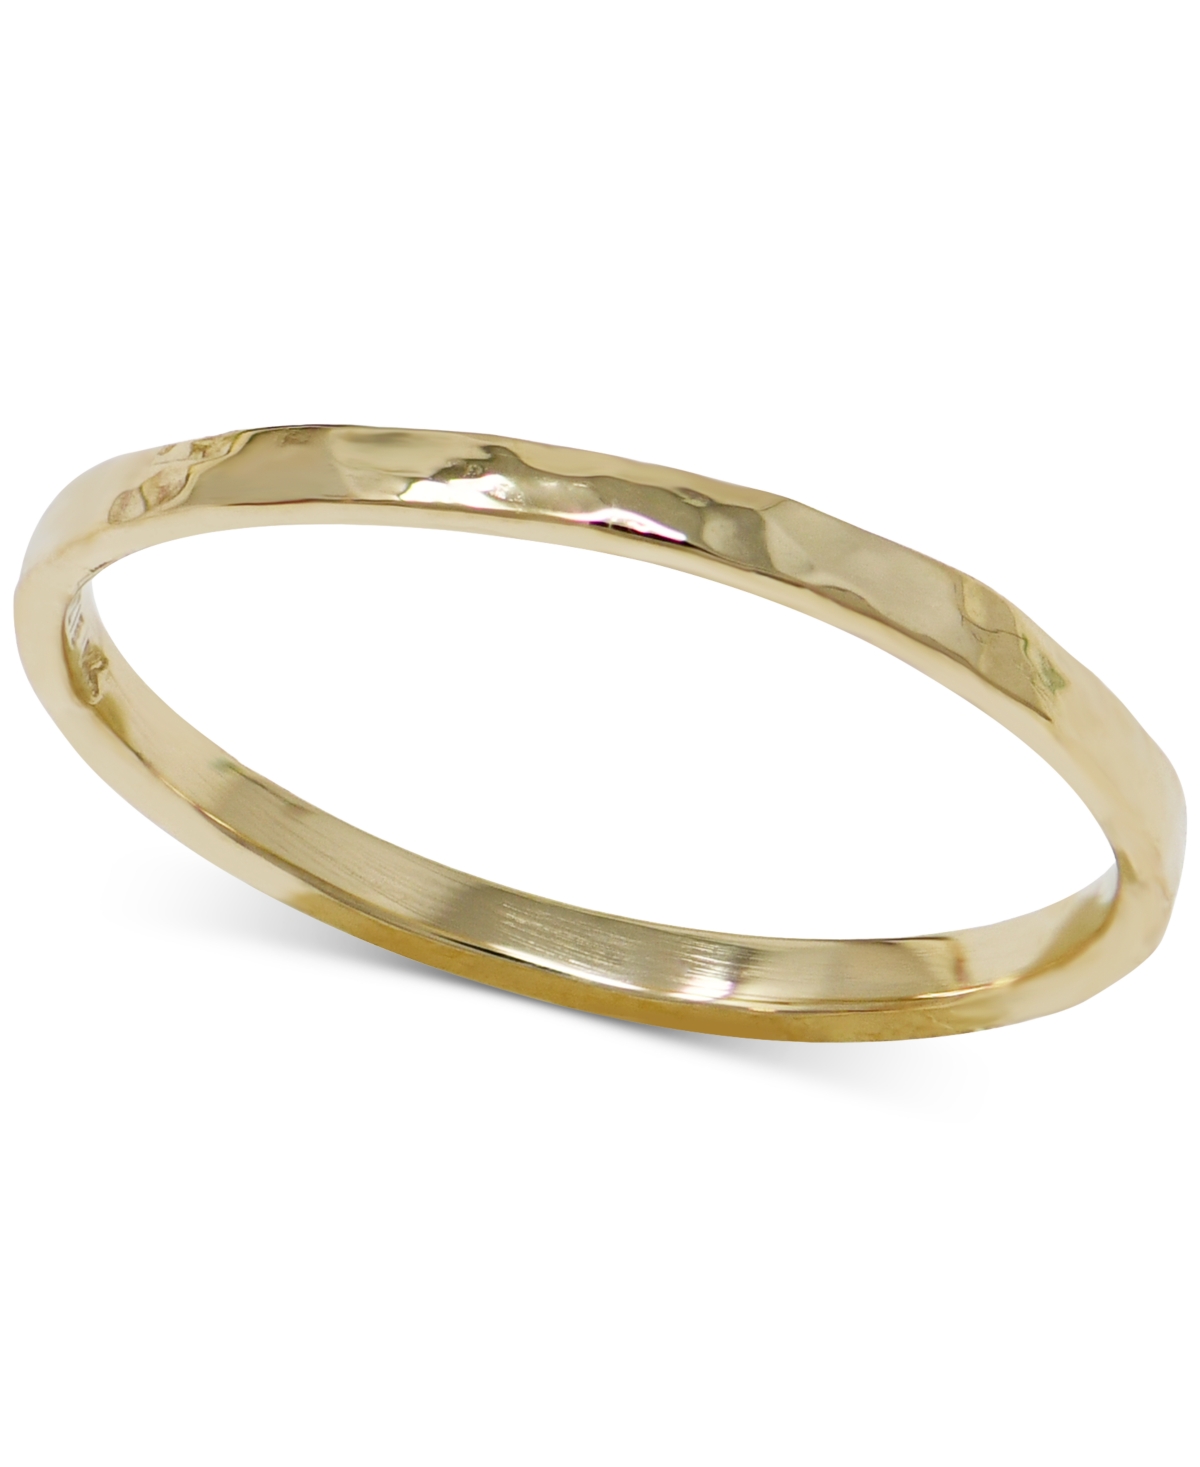 Hammered Narrow Stack Ring in 14k Gold - Gold